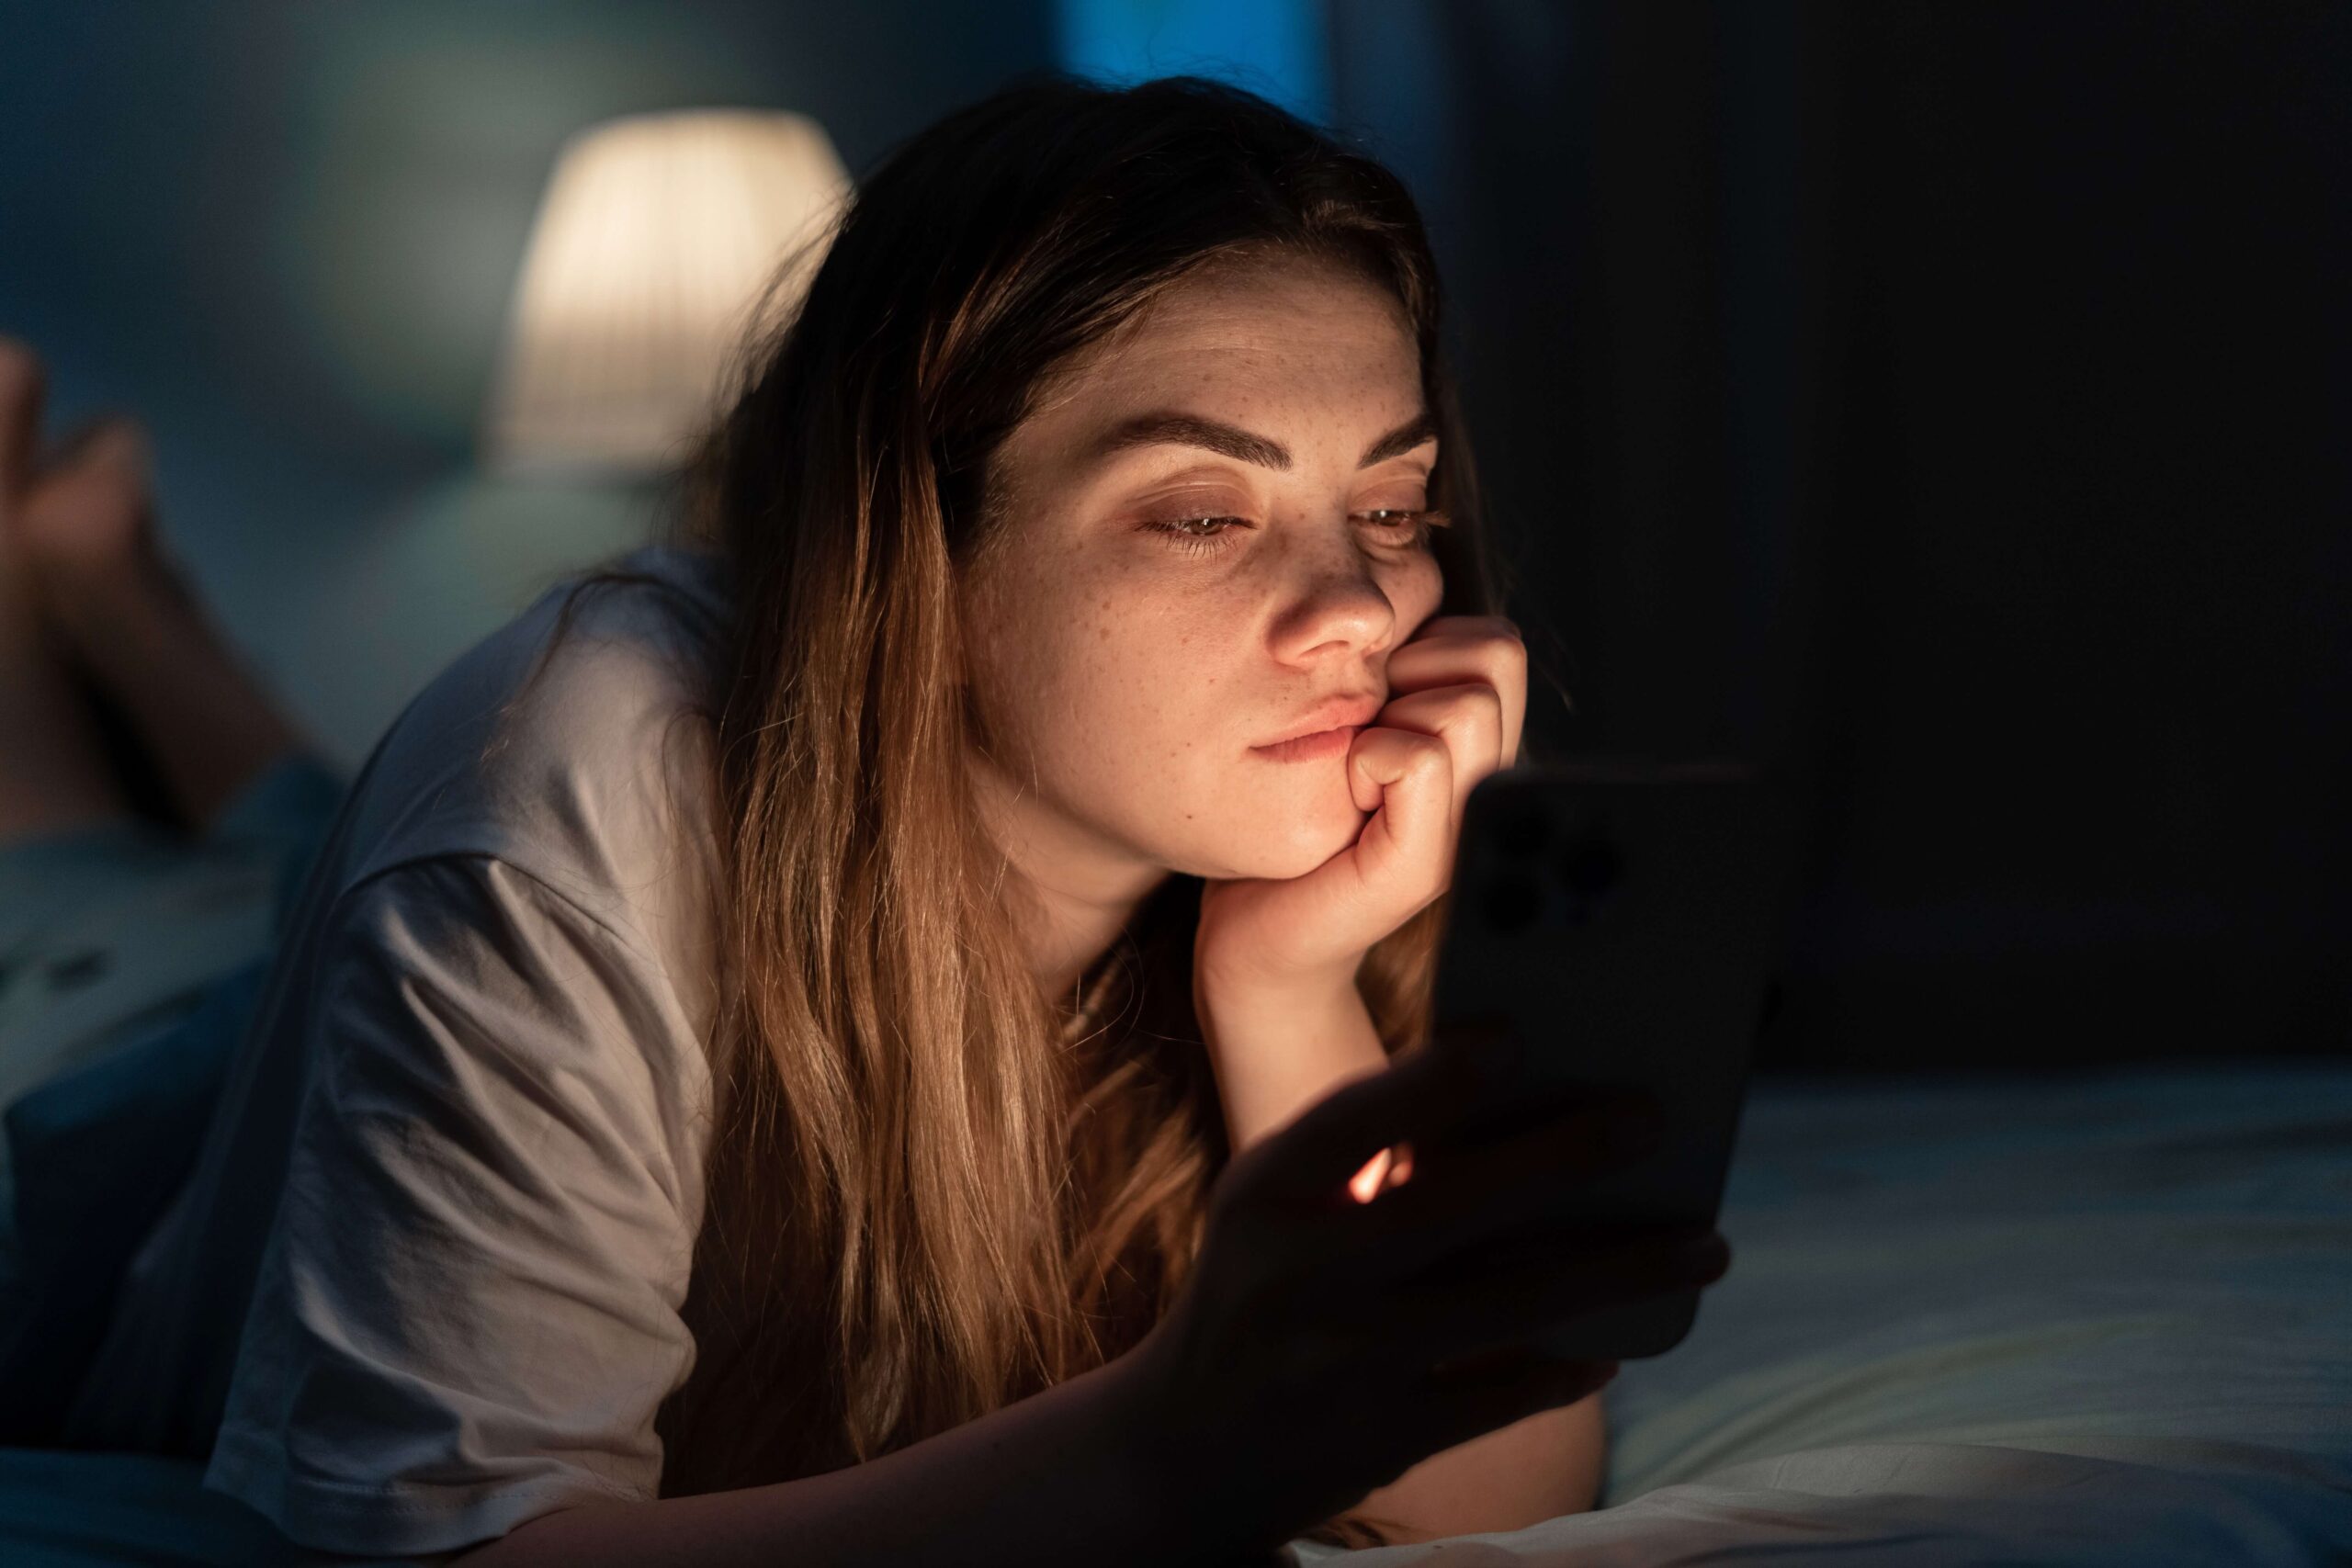 Young female checking her cell phone in the dark with pregnancy concerns—she is contemplating how to calculate her due date